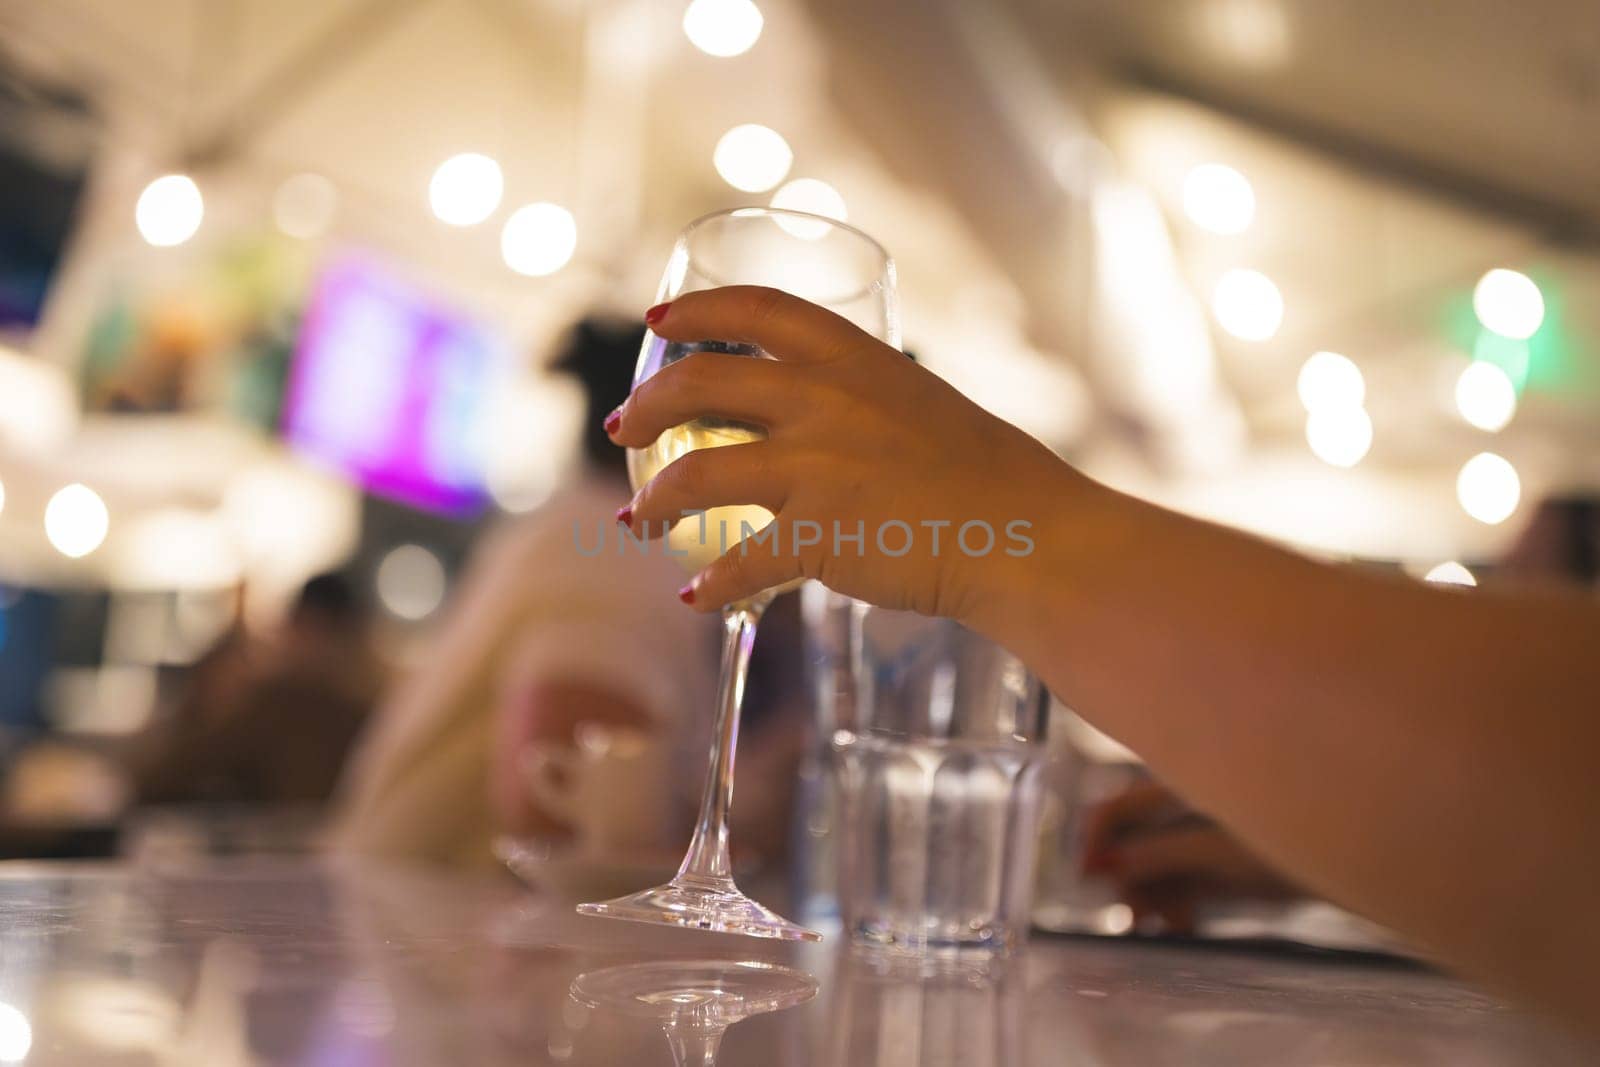 Woman's hand takes a glass ow white wine in restaurant, close up